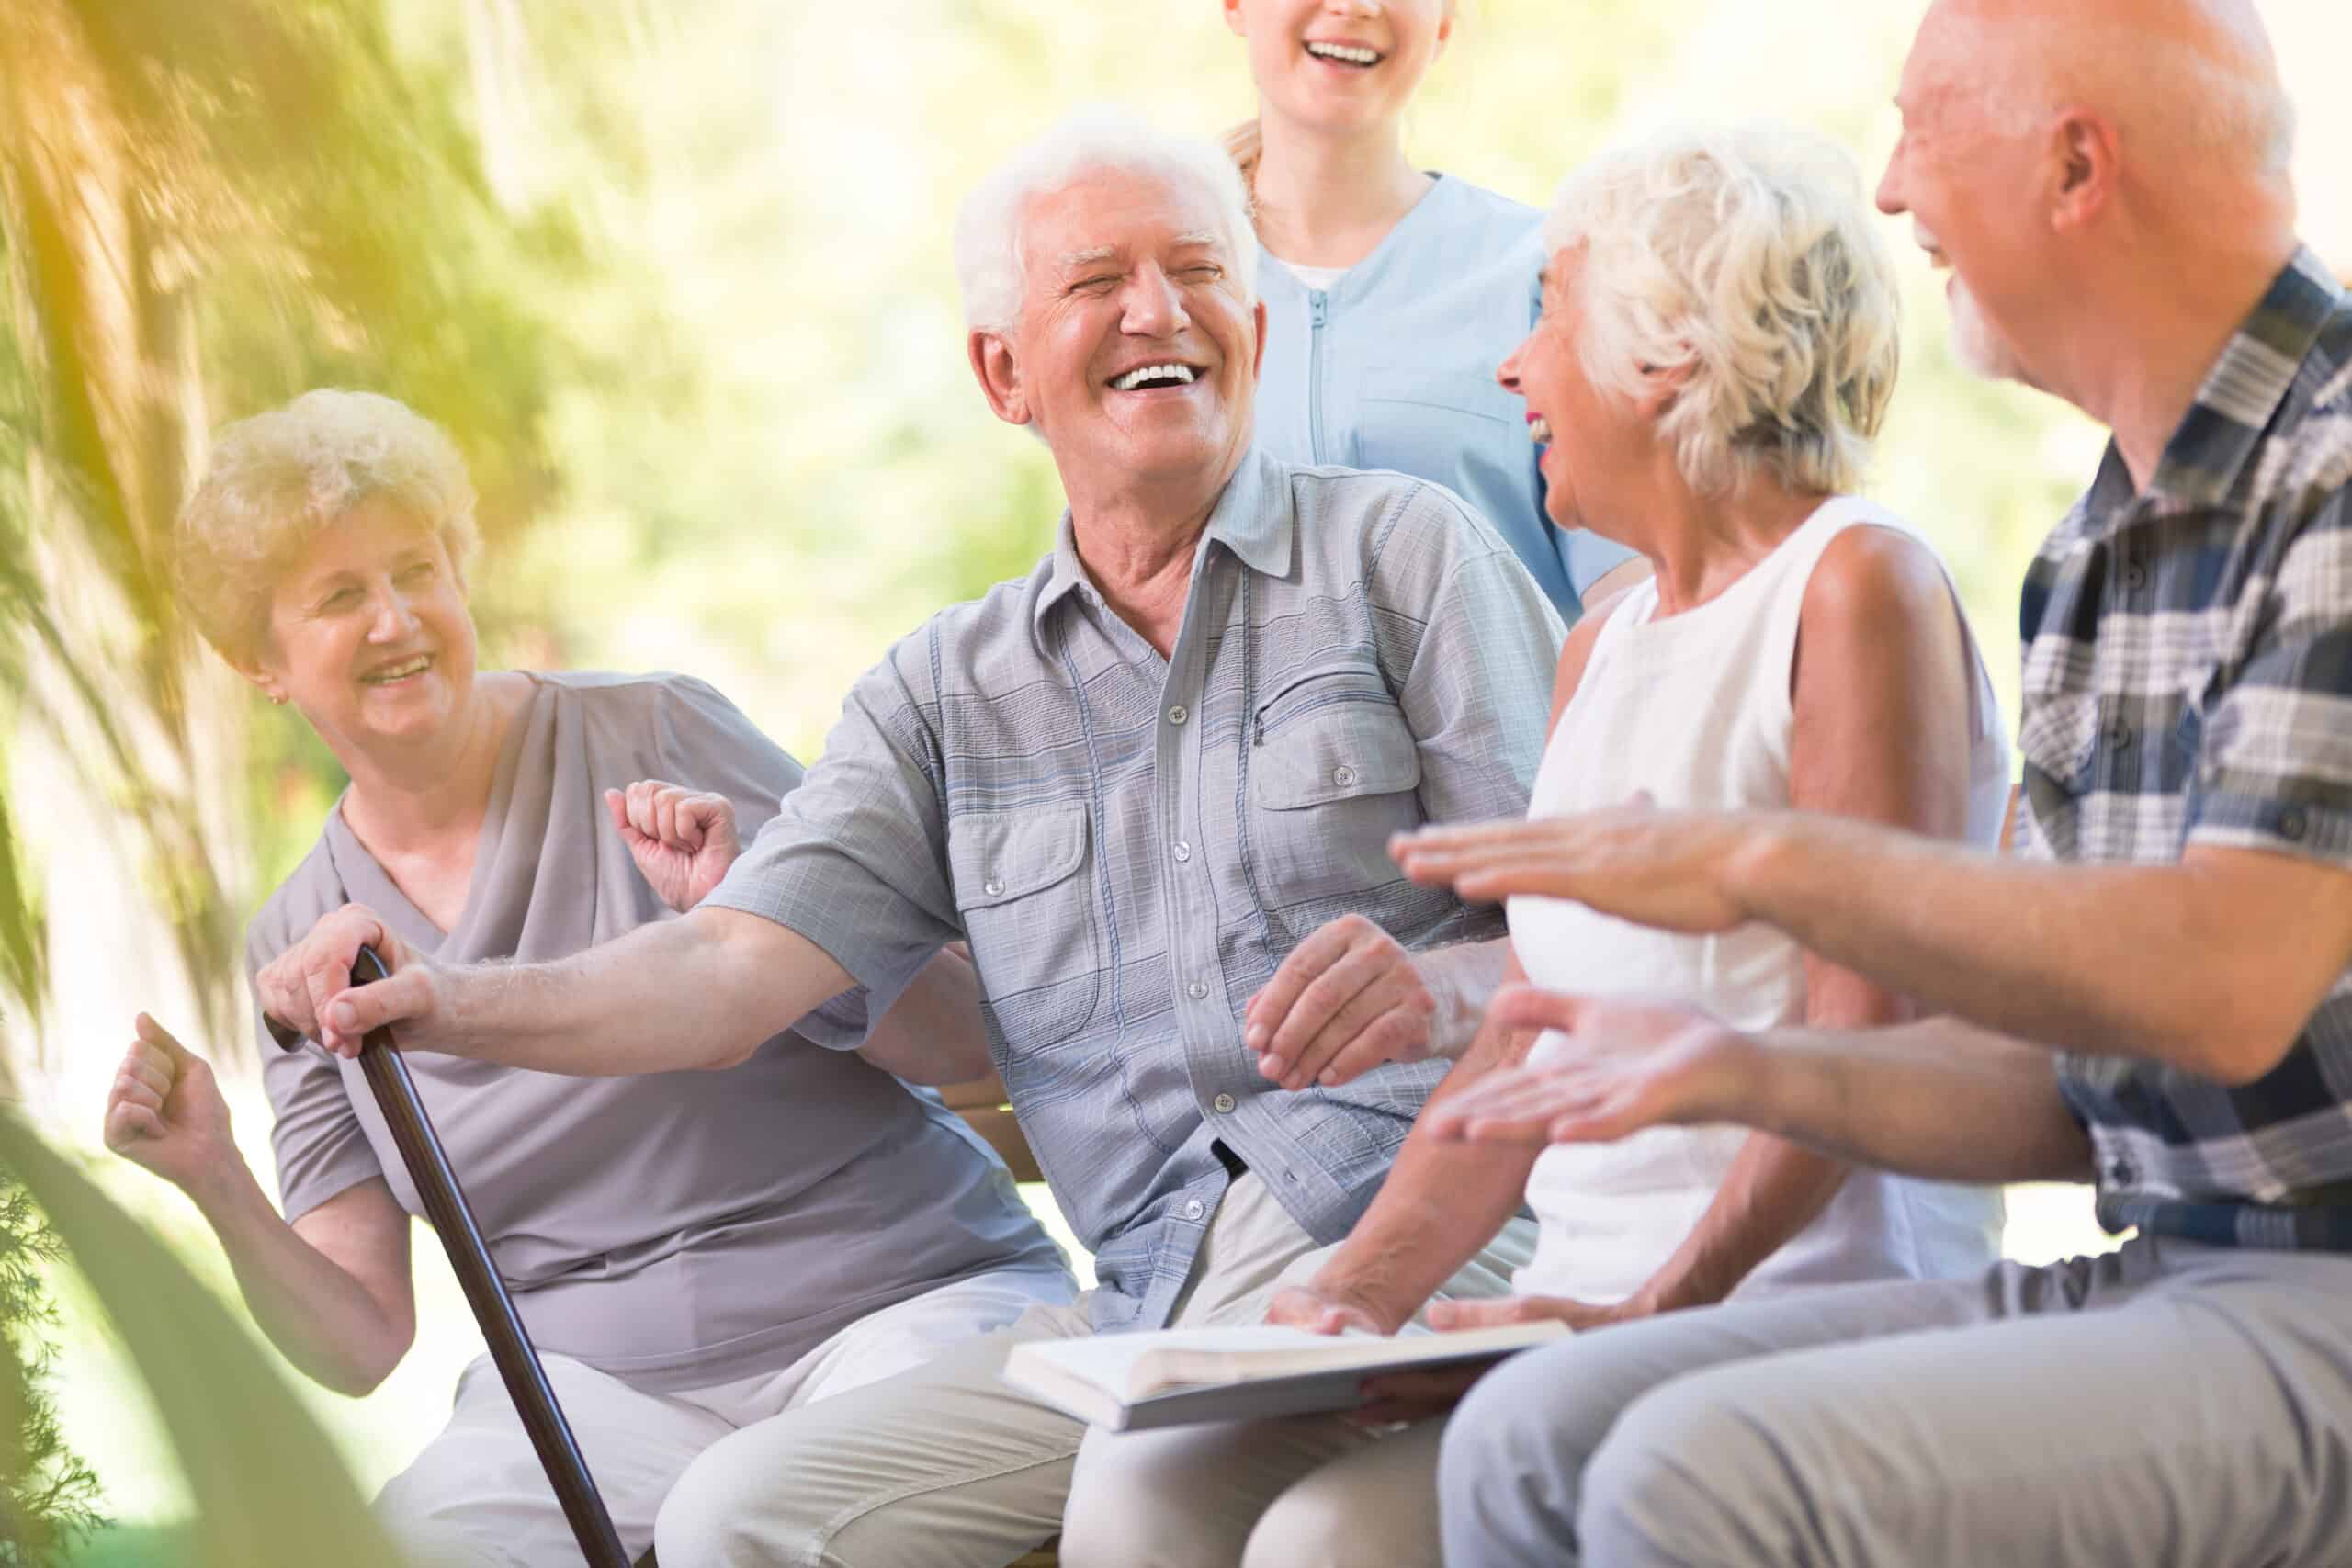 Group of smiling senior friends spending time together sitting in the park